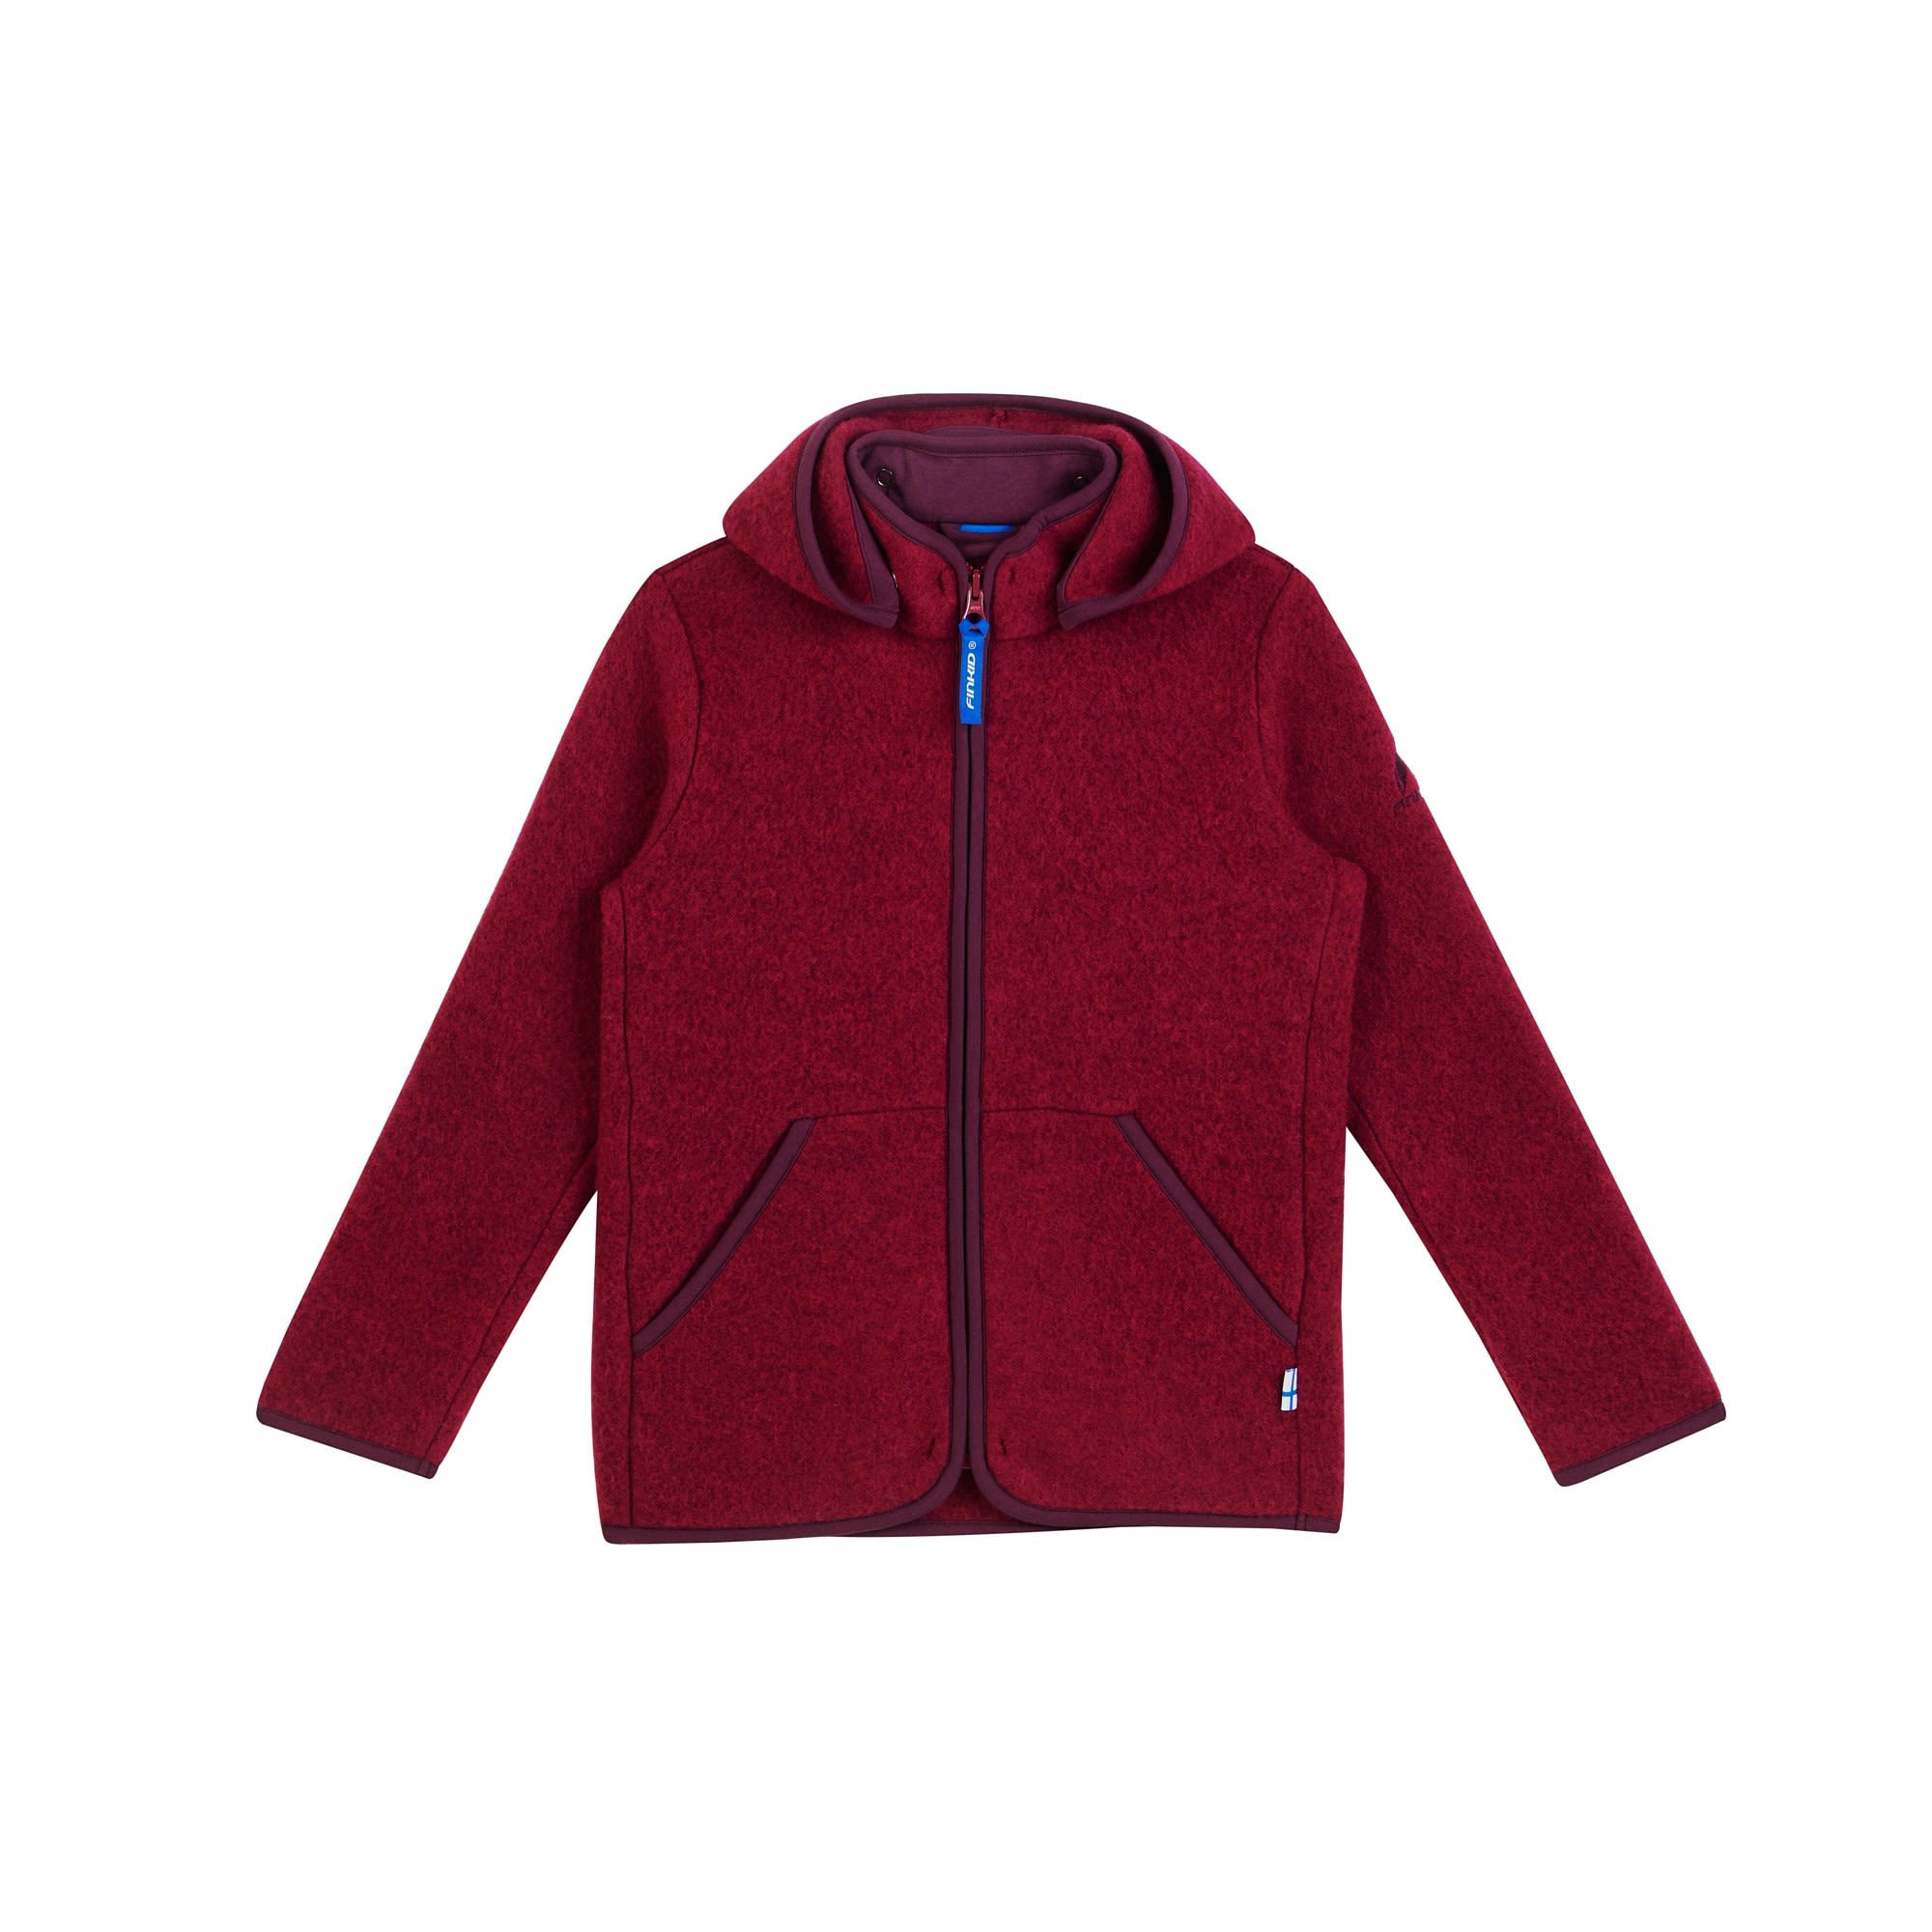 Finkid Luonto Wool Rot- Anoraks- Grsse 80 - 90 - Farbe Beet Red - Eggplant